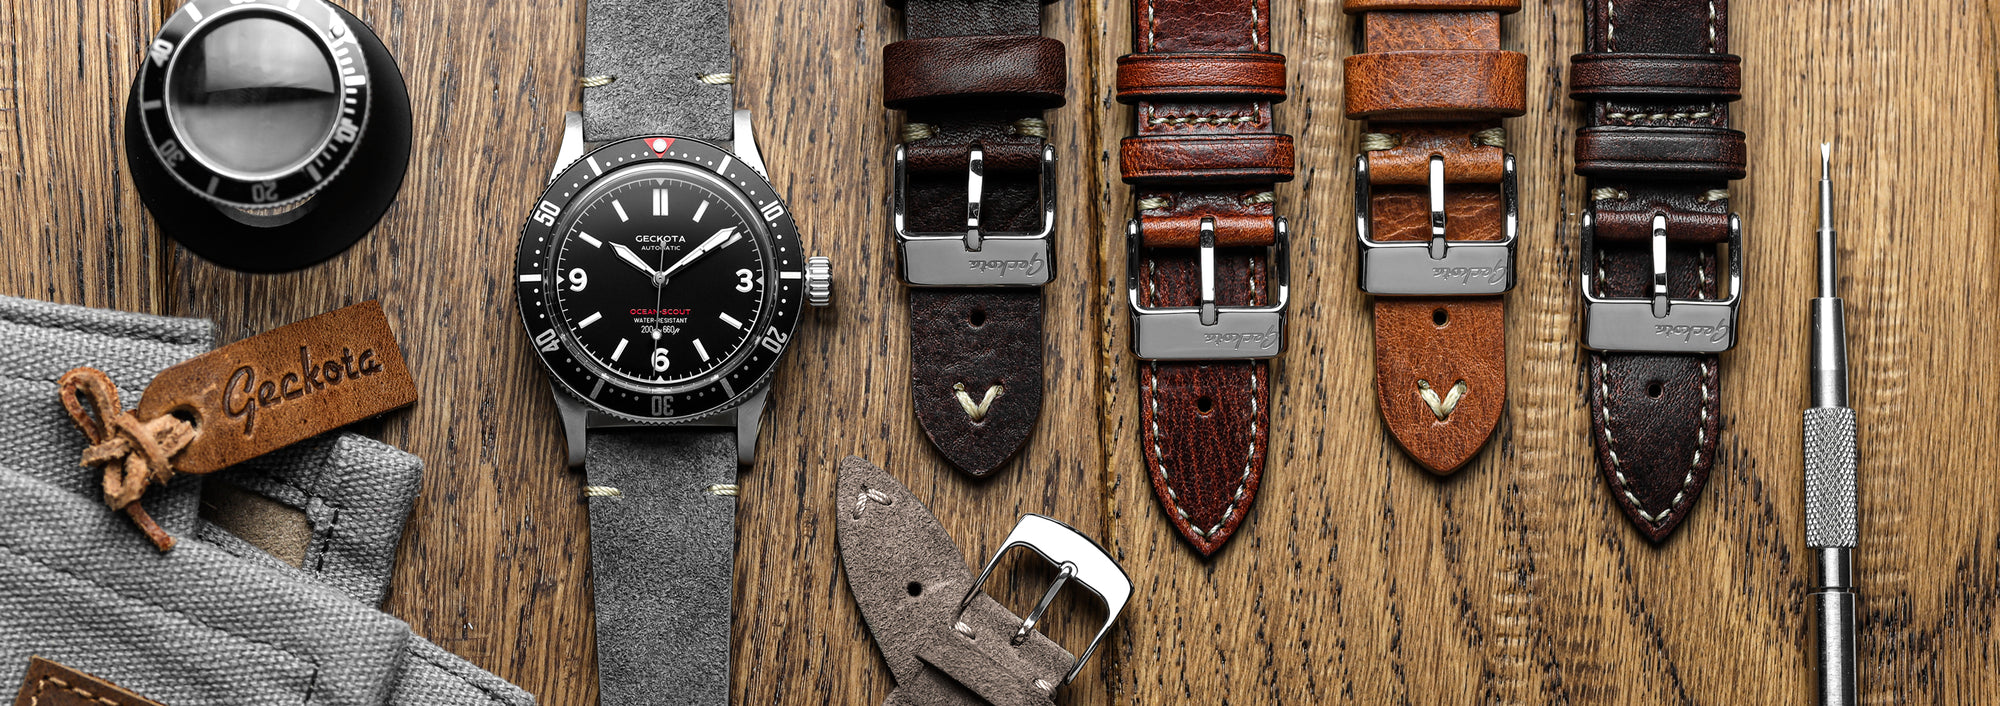 Geckota Ocean Scout Watch and Geckota Leather Straps